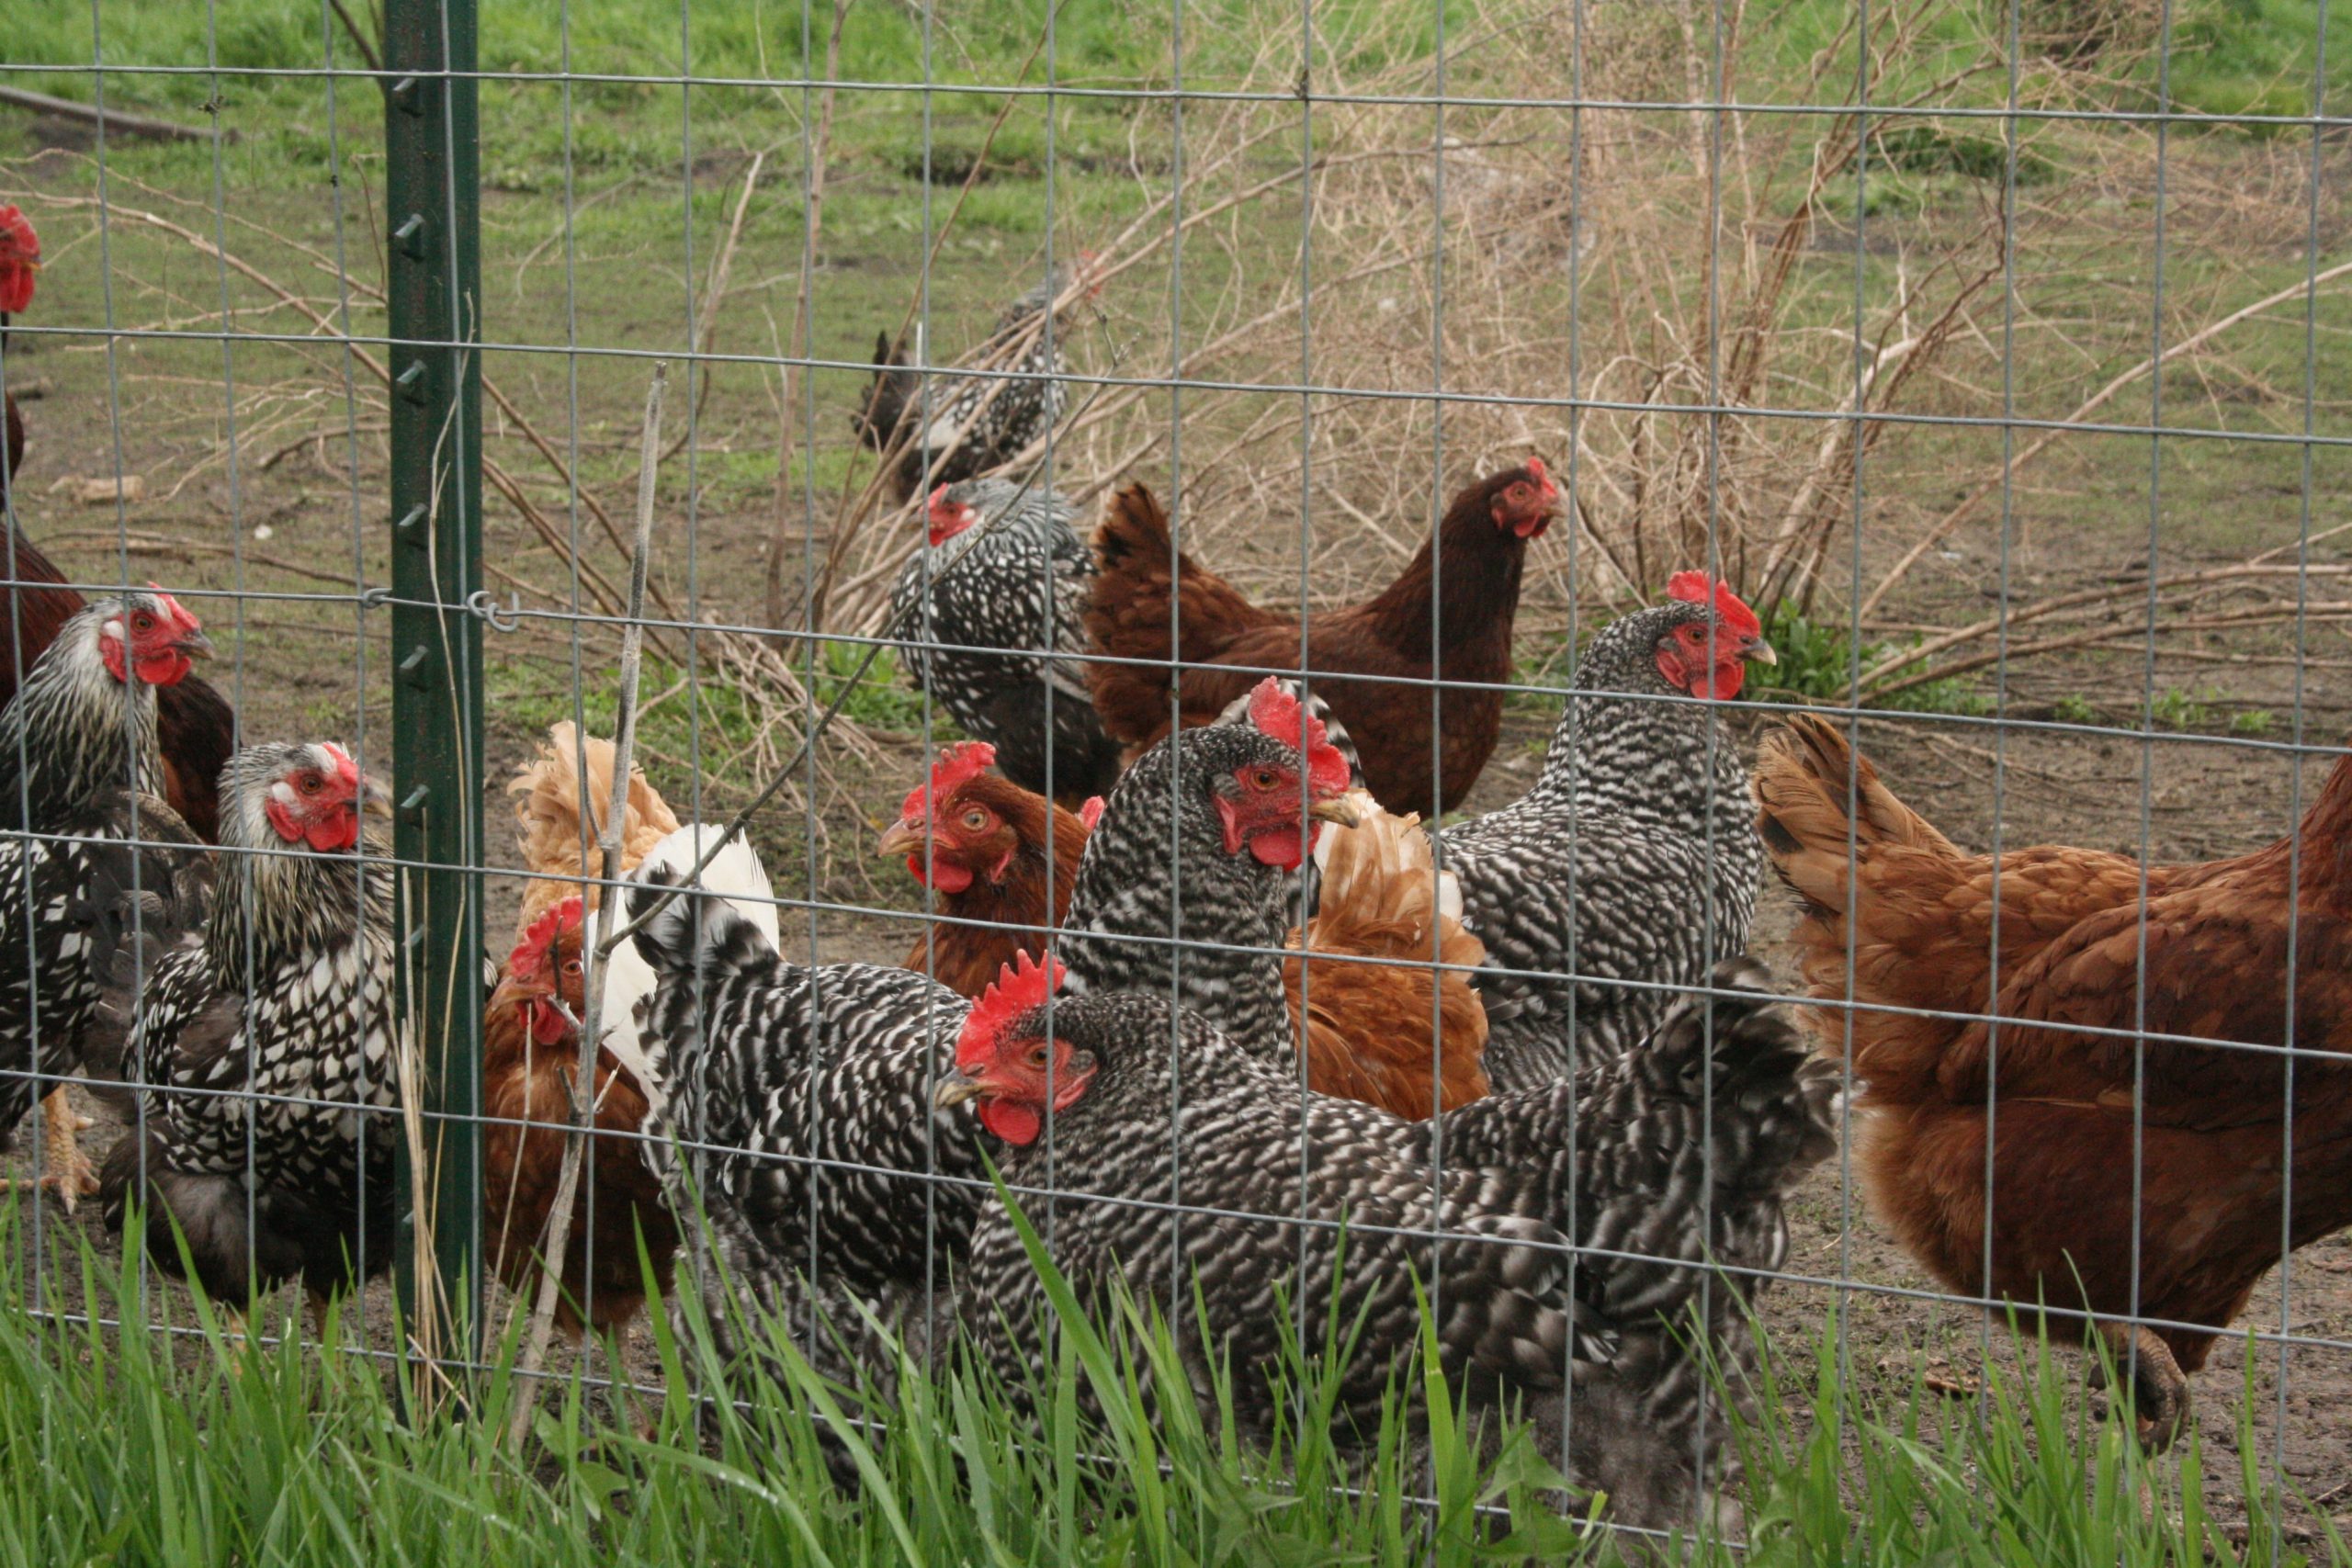 USDA proposes another step toward making chicken farming equitable